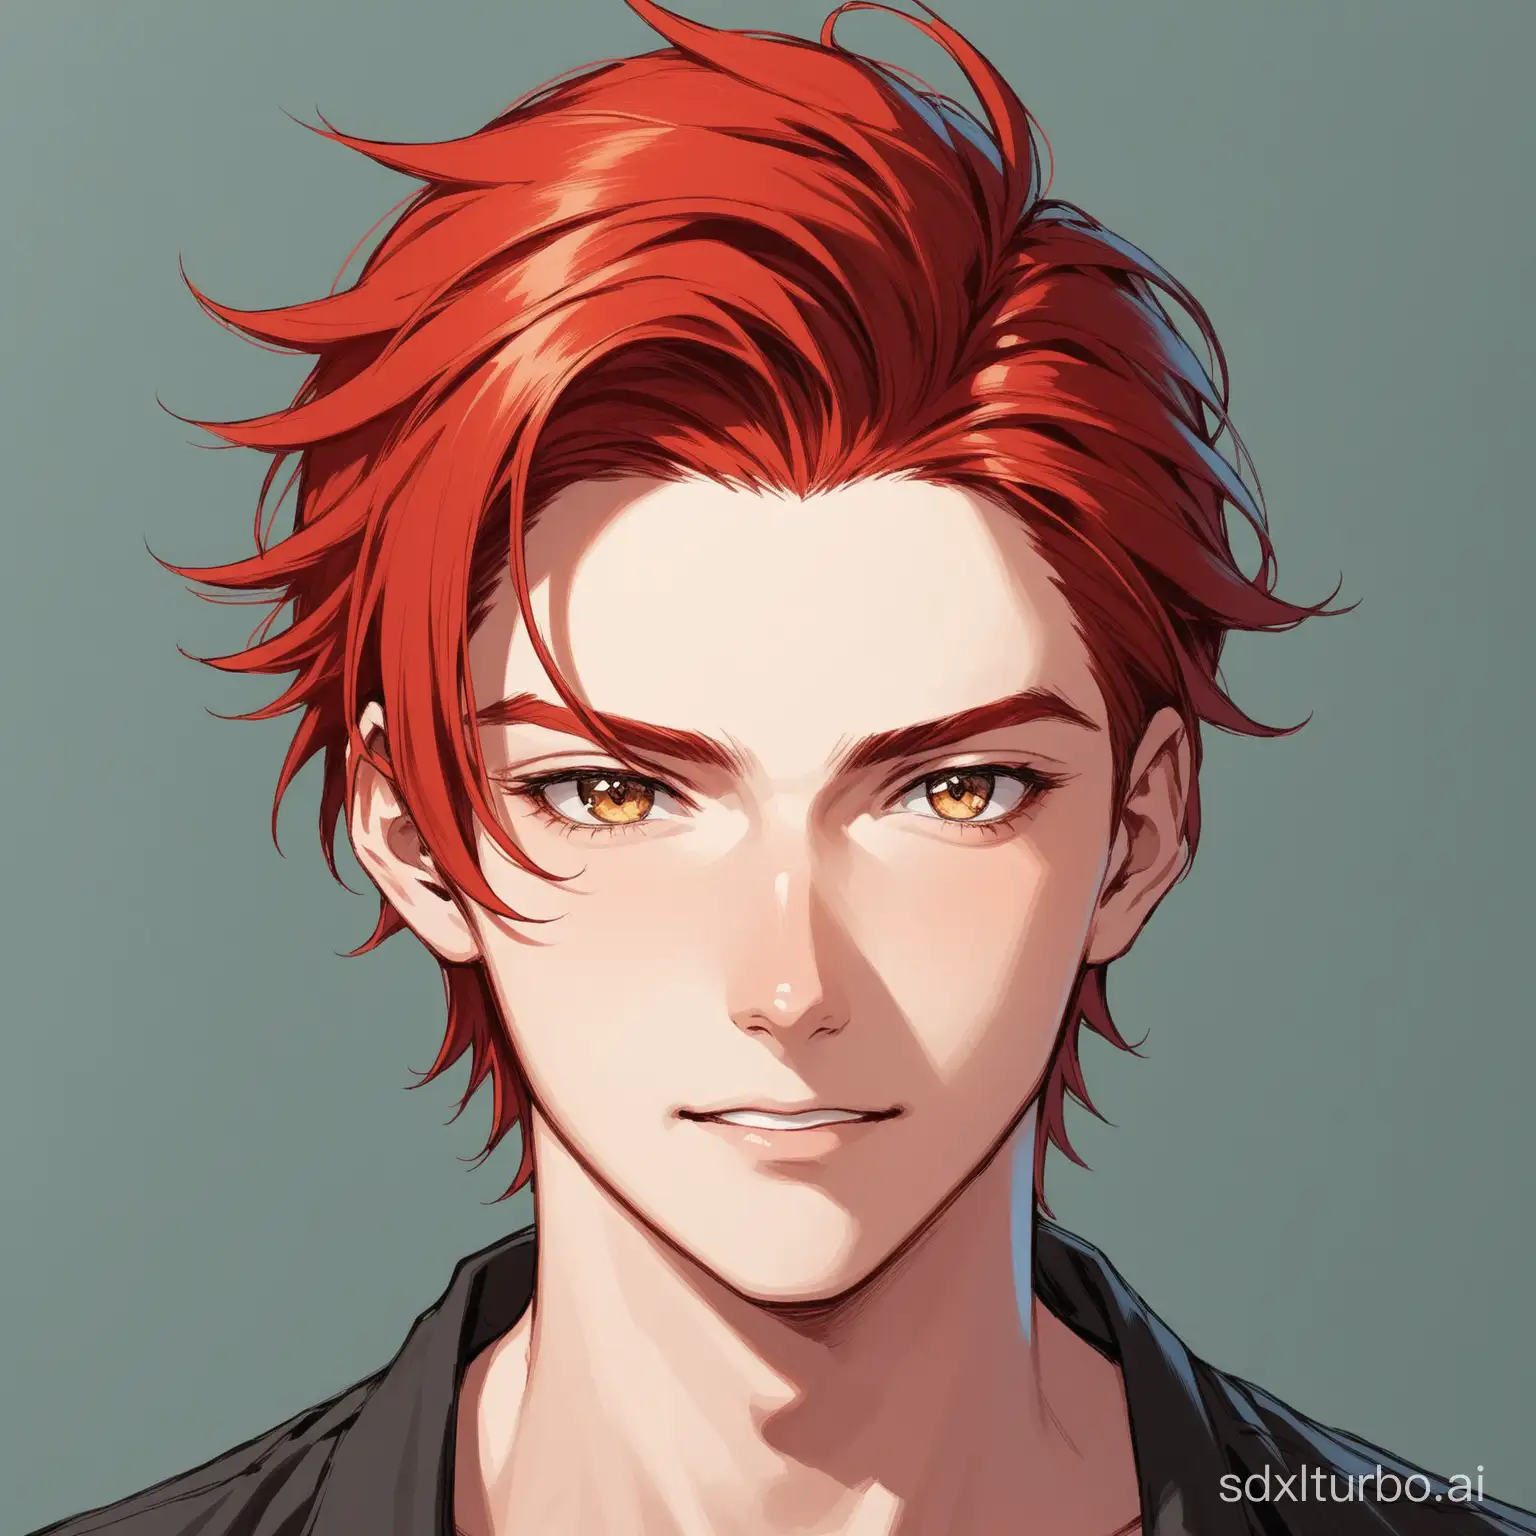 Red-haired young man